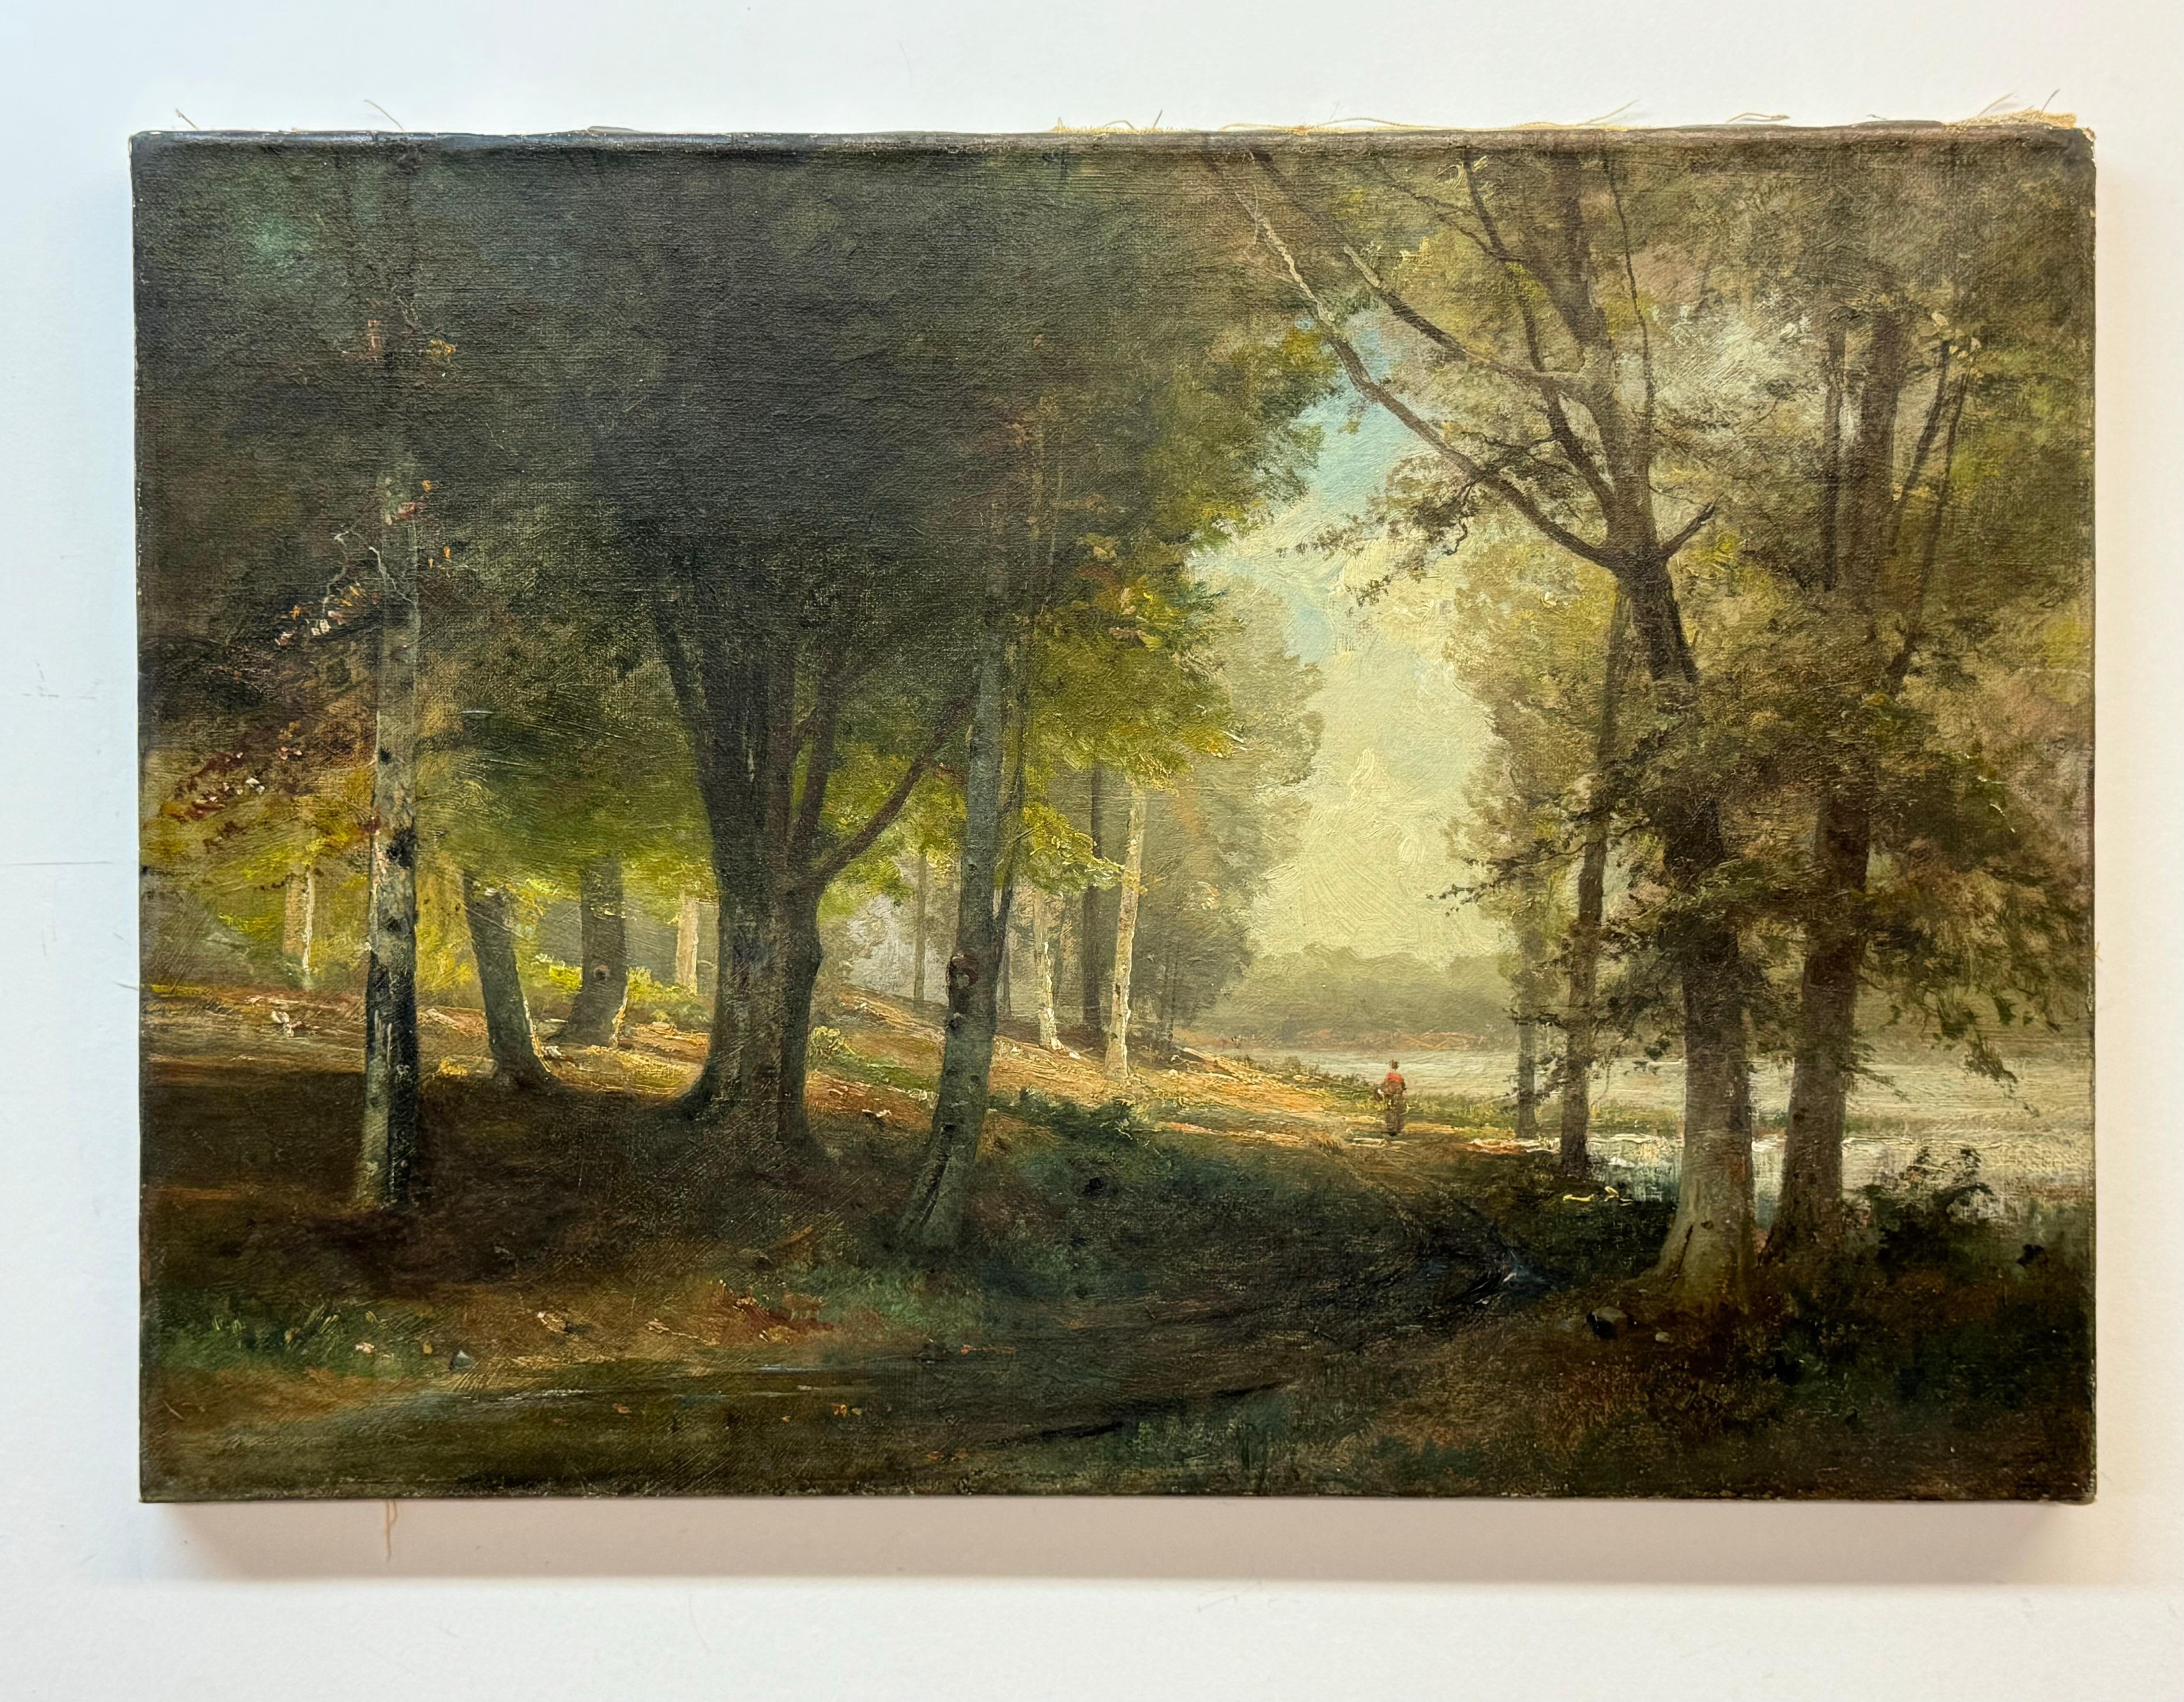 19th century, landscape of figure walking through a forest towards a lake - Painting by Unknown